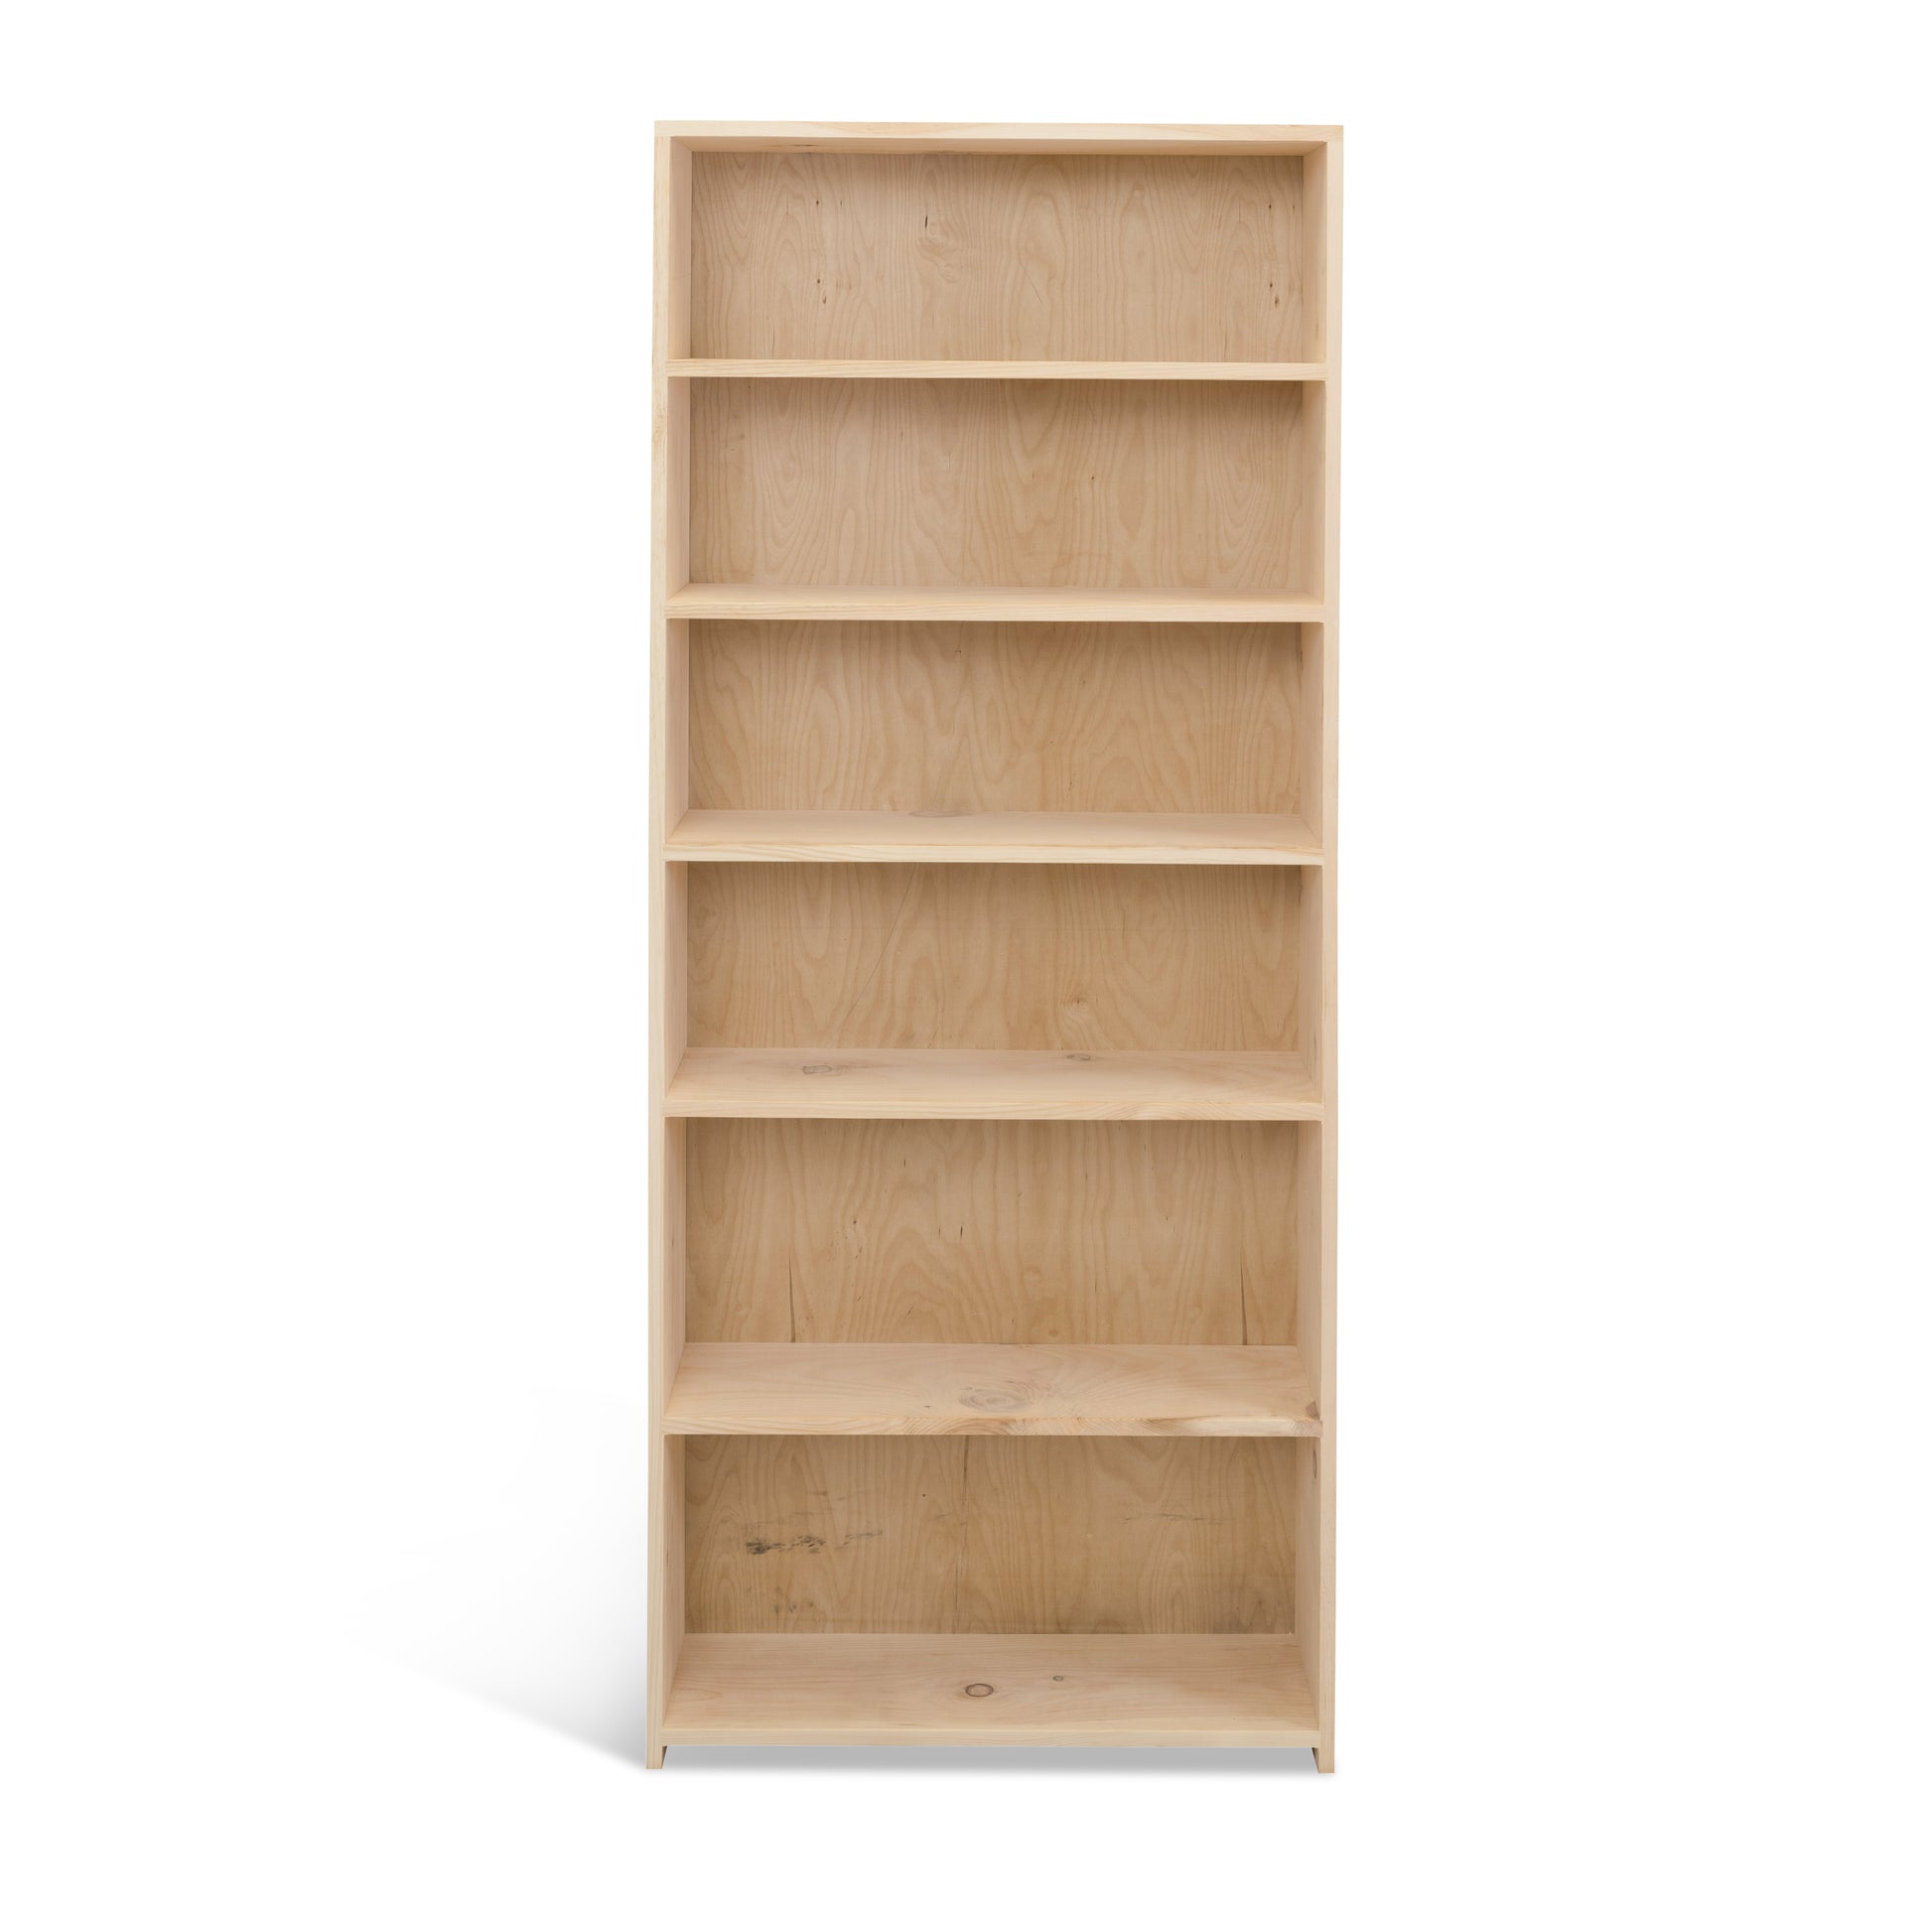 Evergreen Pine Bookcase with 9-1/4" depth shown unfinished.